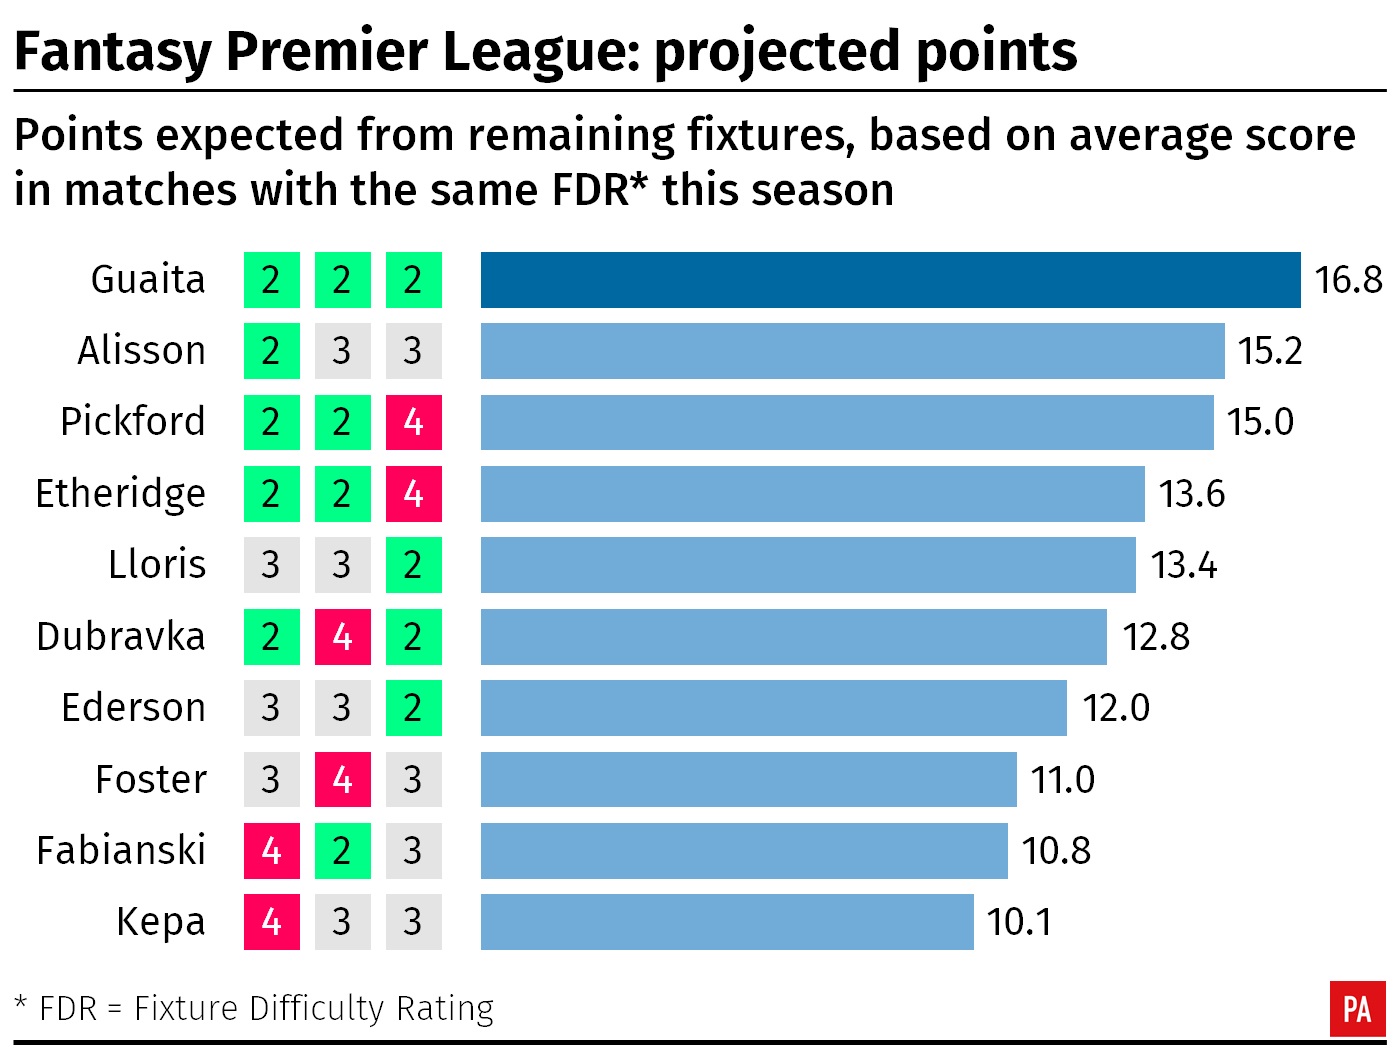 A graphic showing the projected Fantasy Premier League points for goalkeepers in the remaining Premier League fixtures